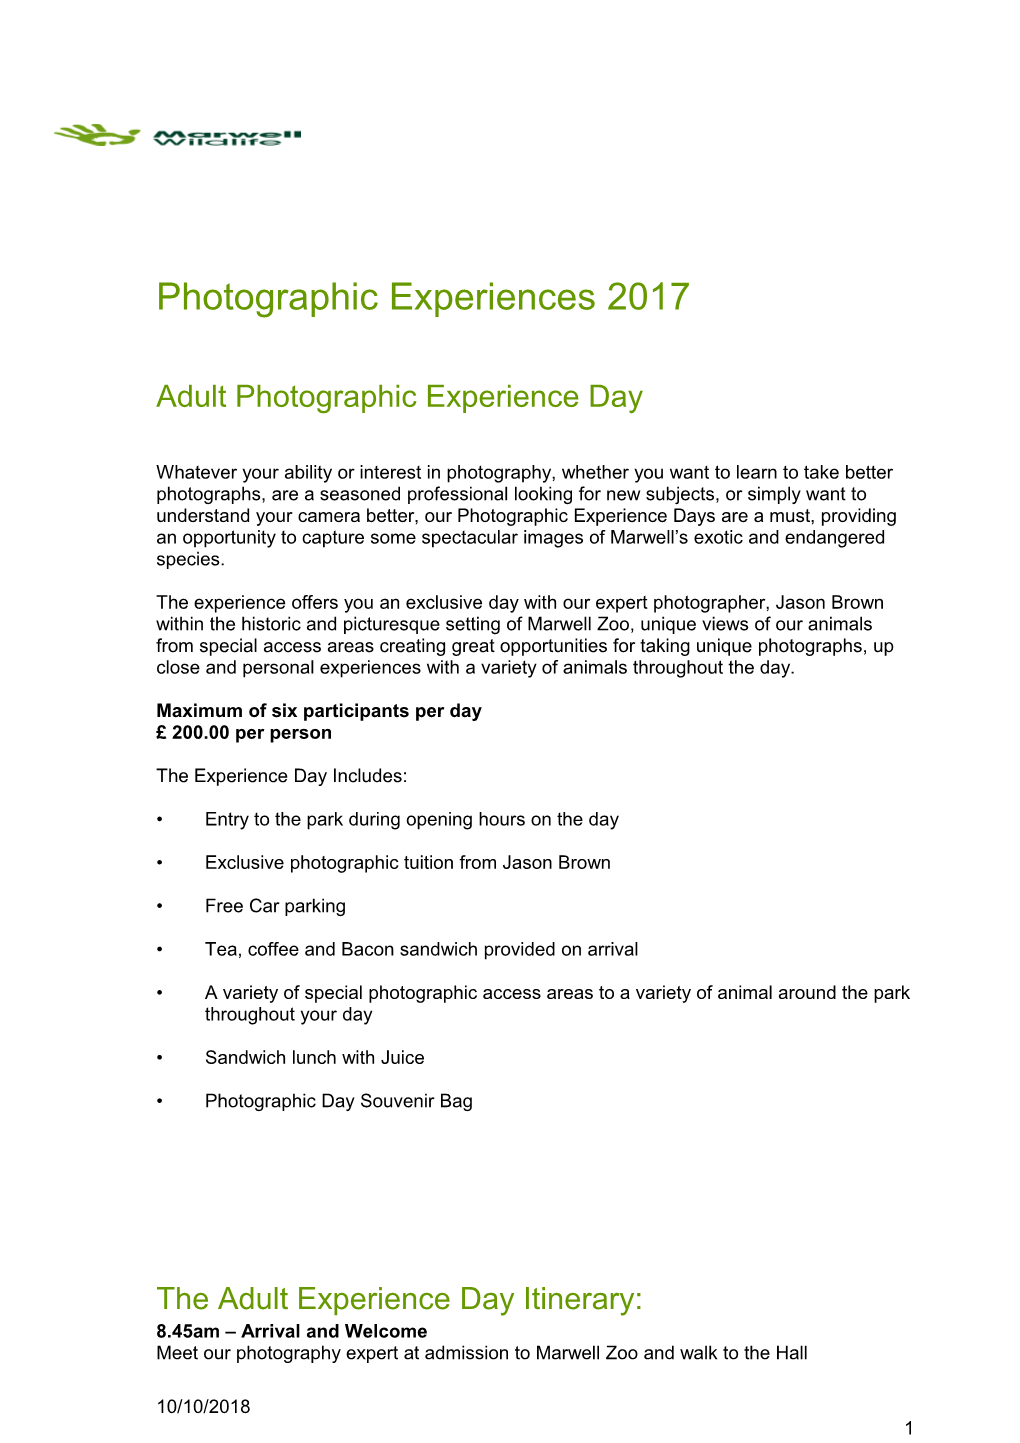 Adult Photographic Experience Day